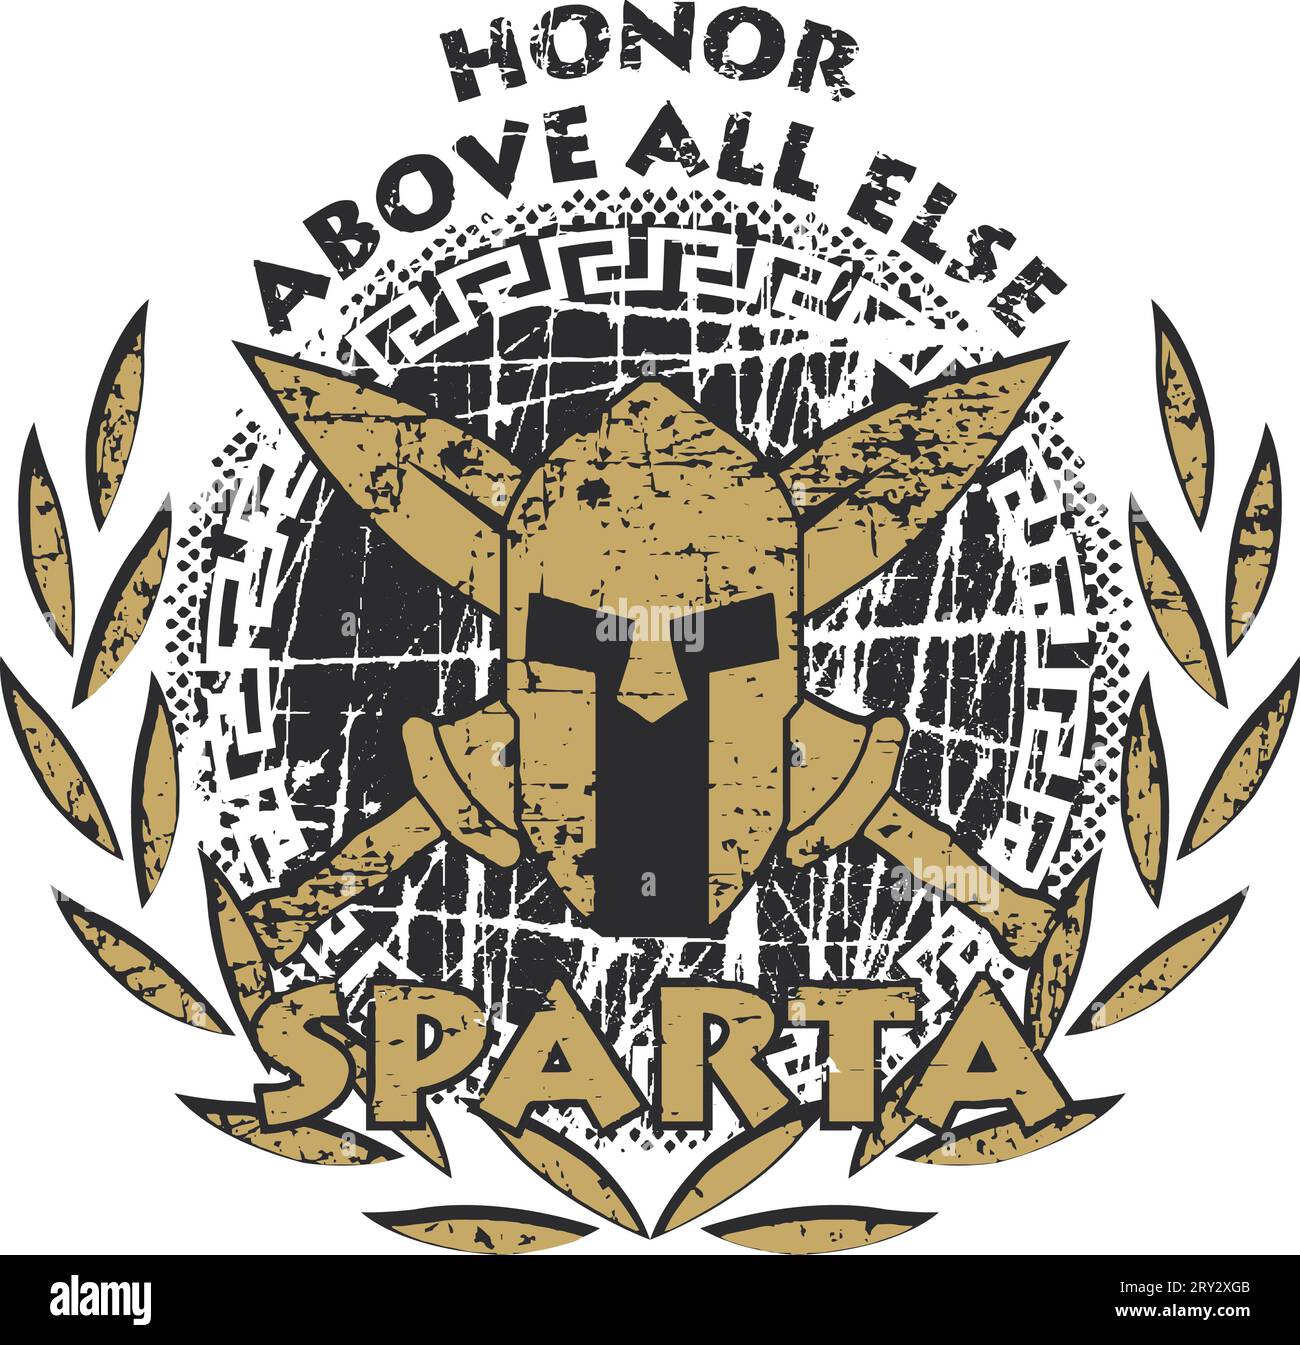 Scratched spartan artwork for t-shirt. Helmet, crossed swords, shield with meander, laurel wreath and two inscriptions 'Sparta' and 'Honor above all e'. Stock Vector